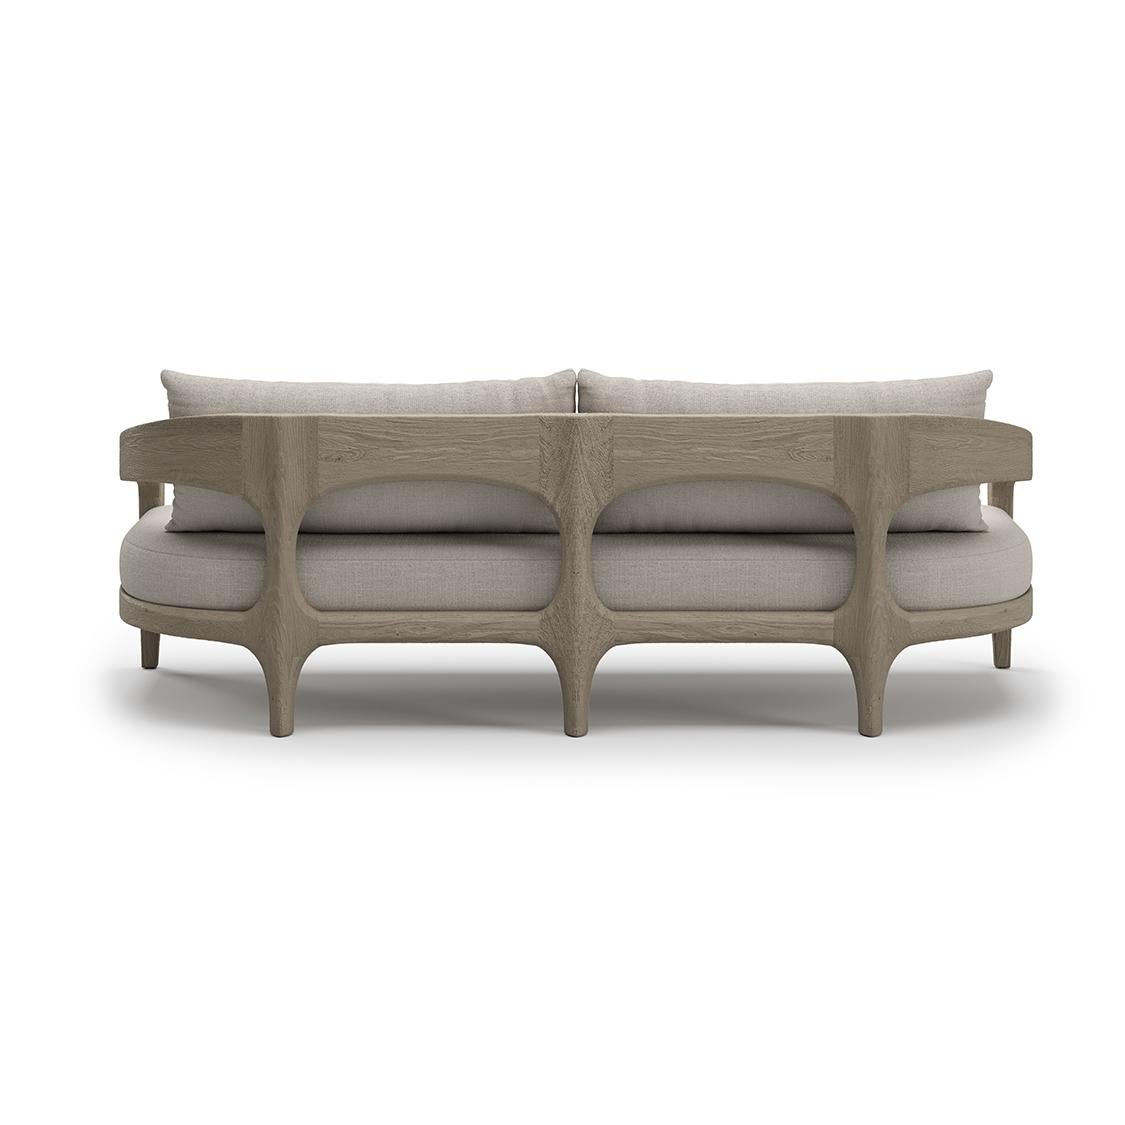 Hand-Crafted Whale-ash Outdoor 3 Seater Sofa by SNOC For Sale